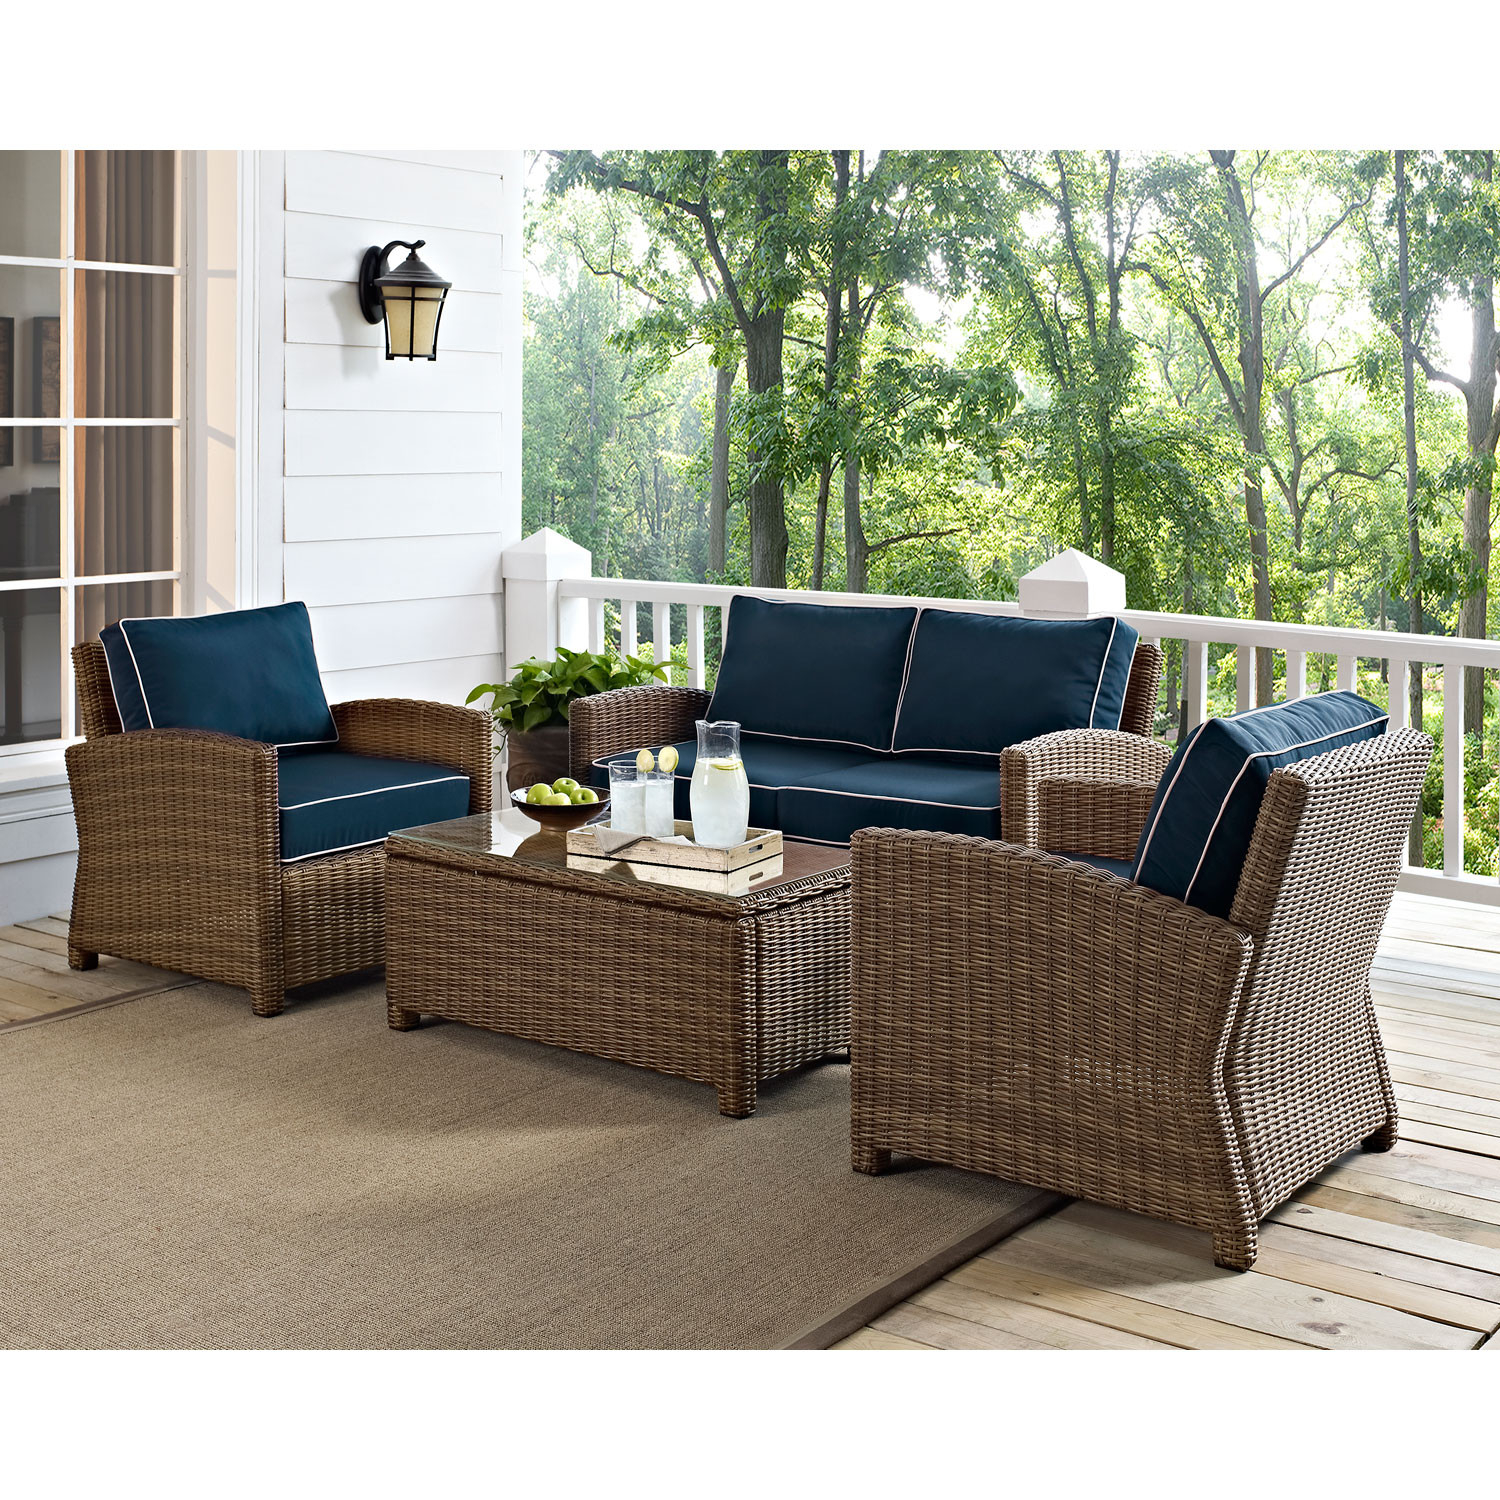 Bradenton 4 Piece Outdoor Wicker Seating Set With Navy Cushions throughout sizing 1500 X 1500